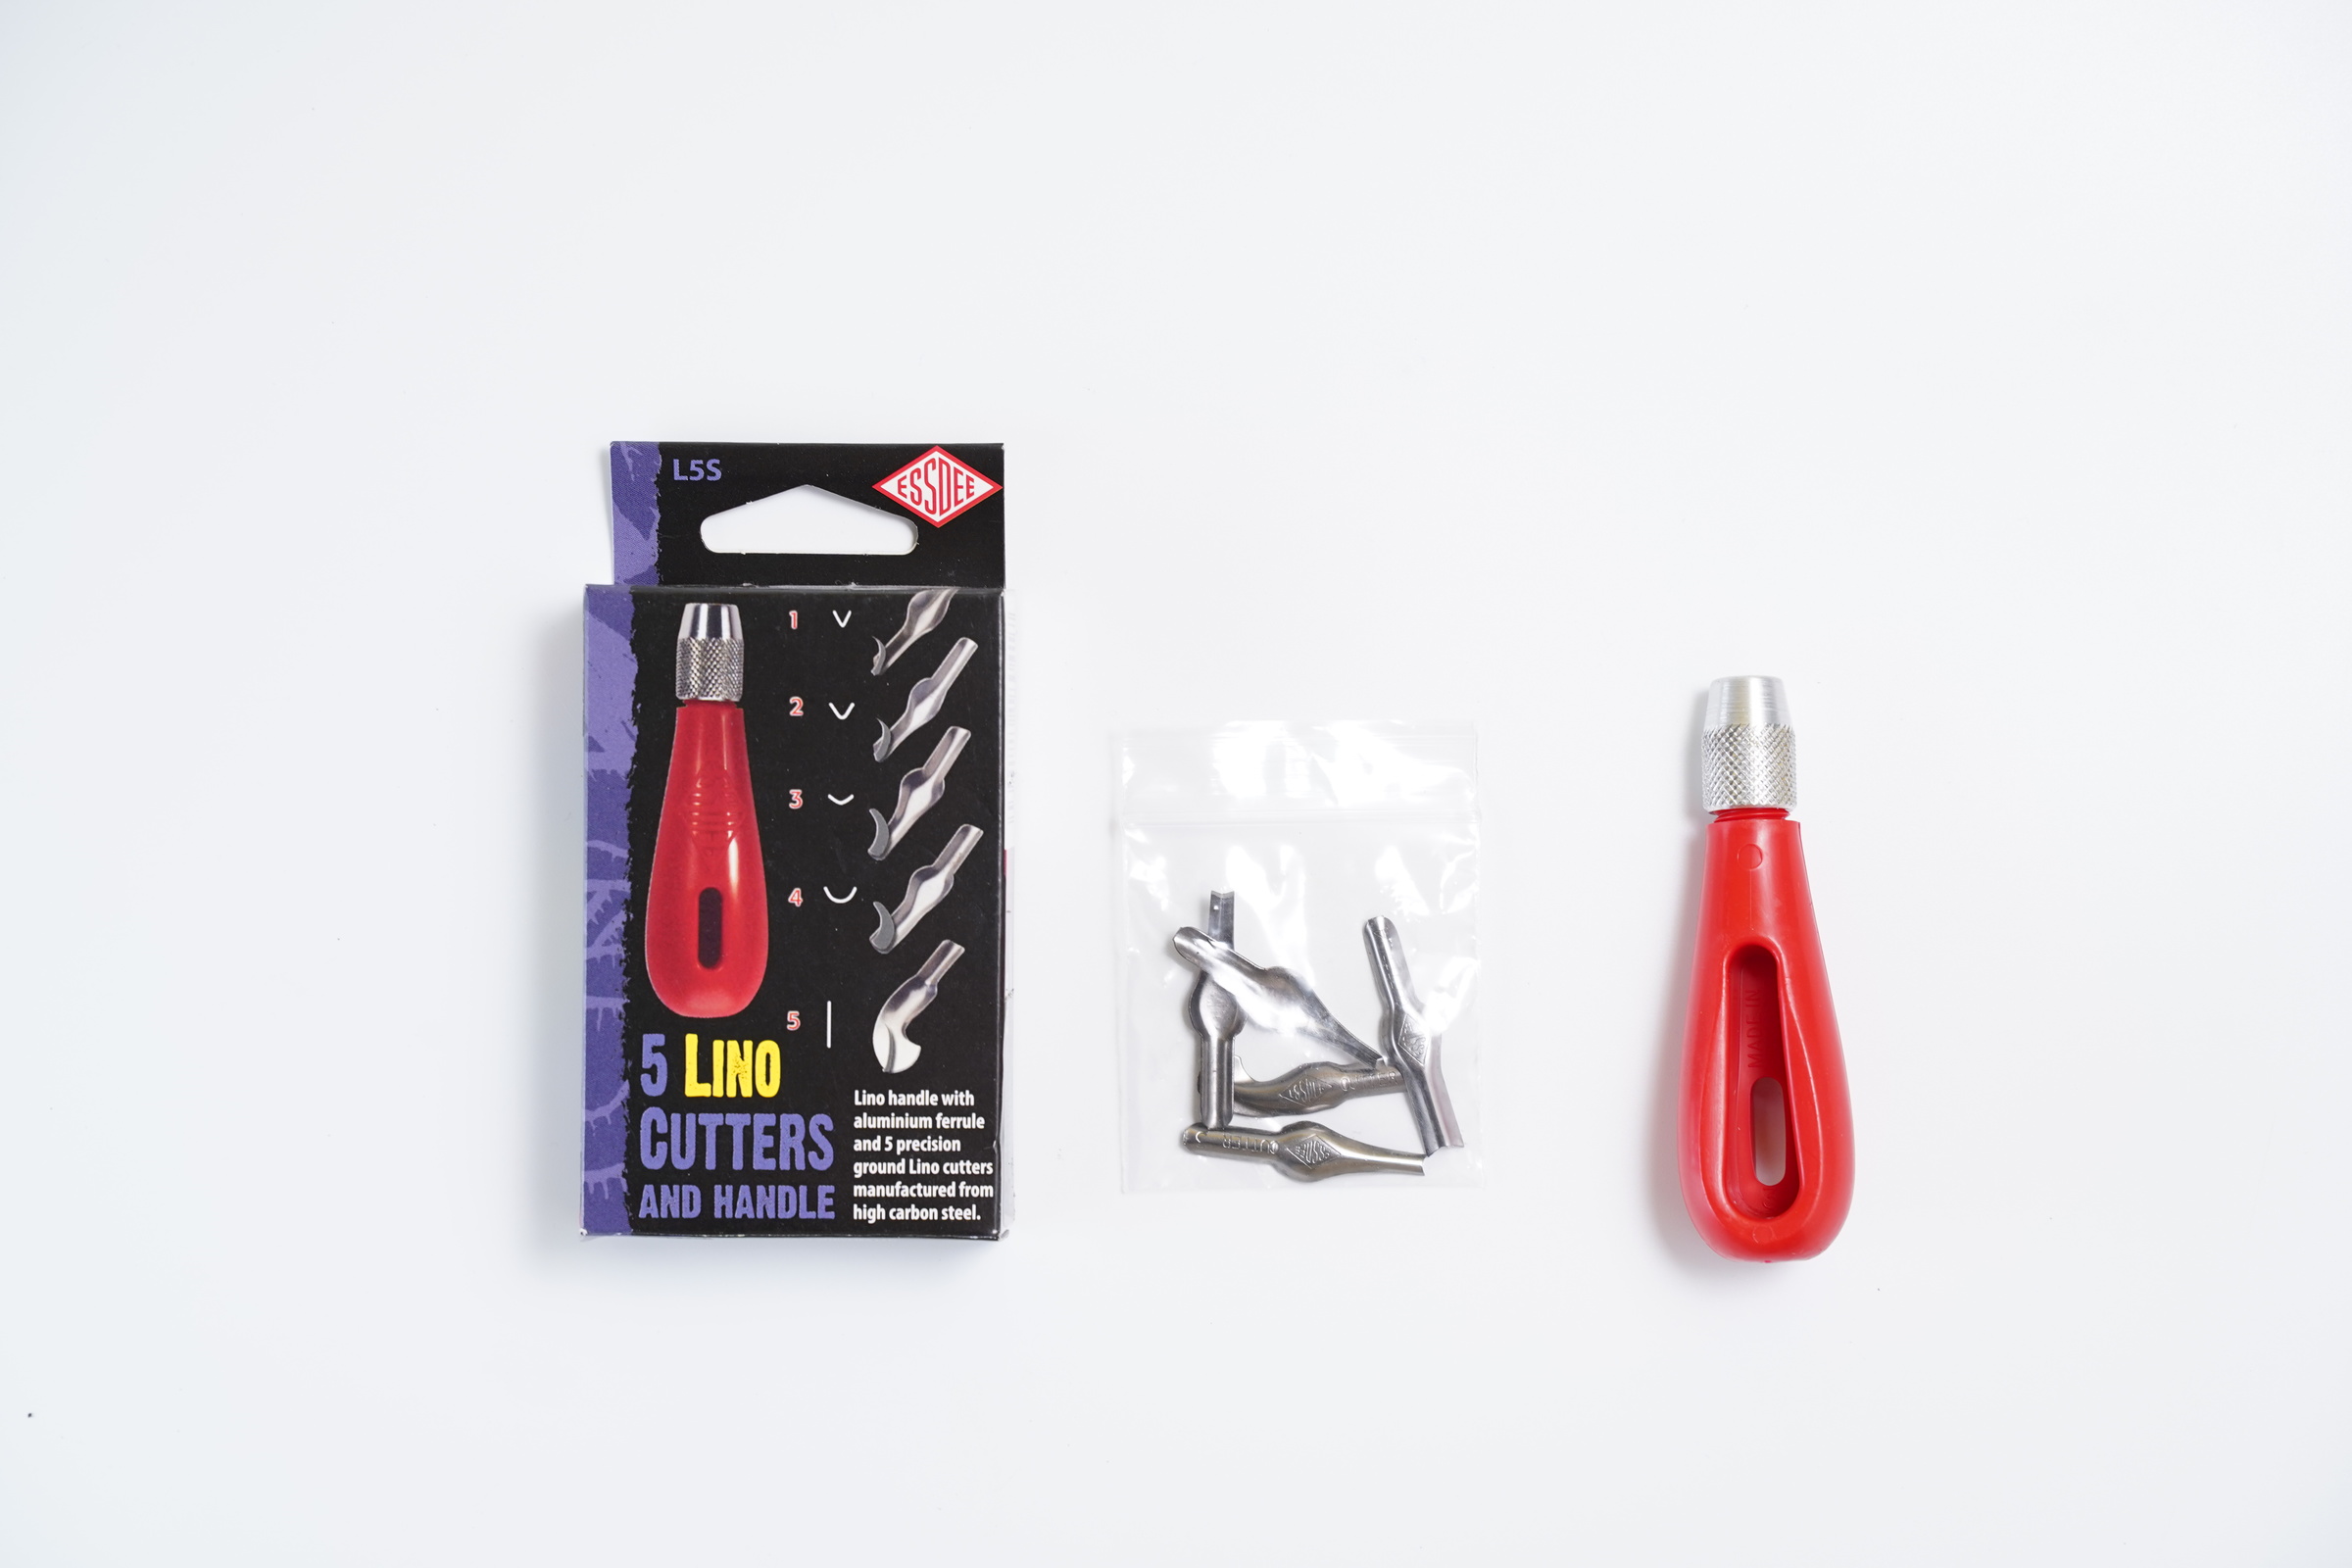 Essdee Lino Cutter & Stamp Carving Kit 3 In 1